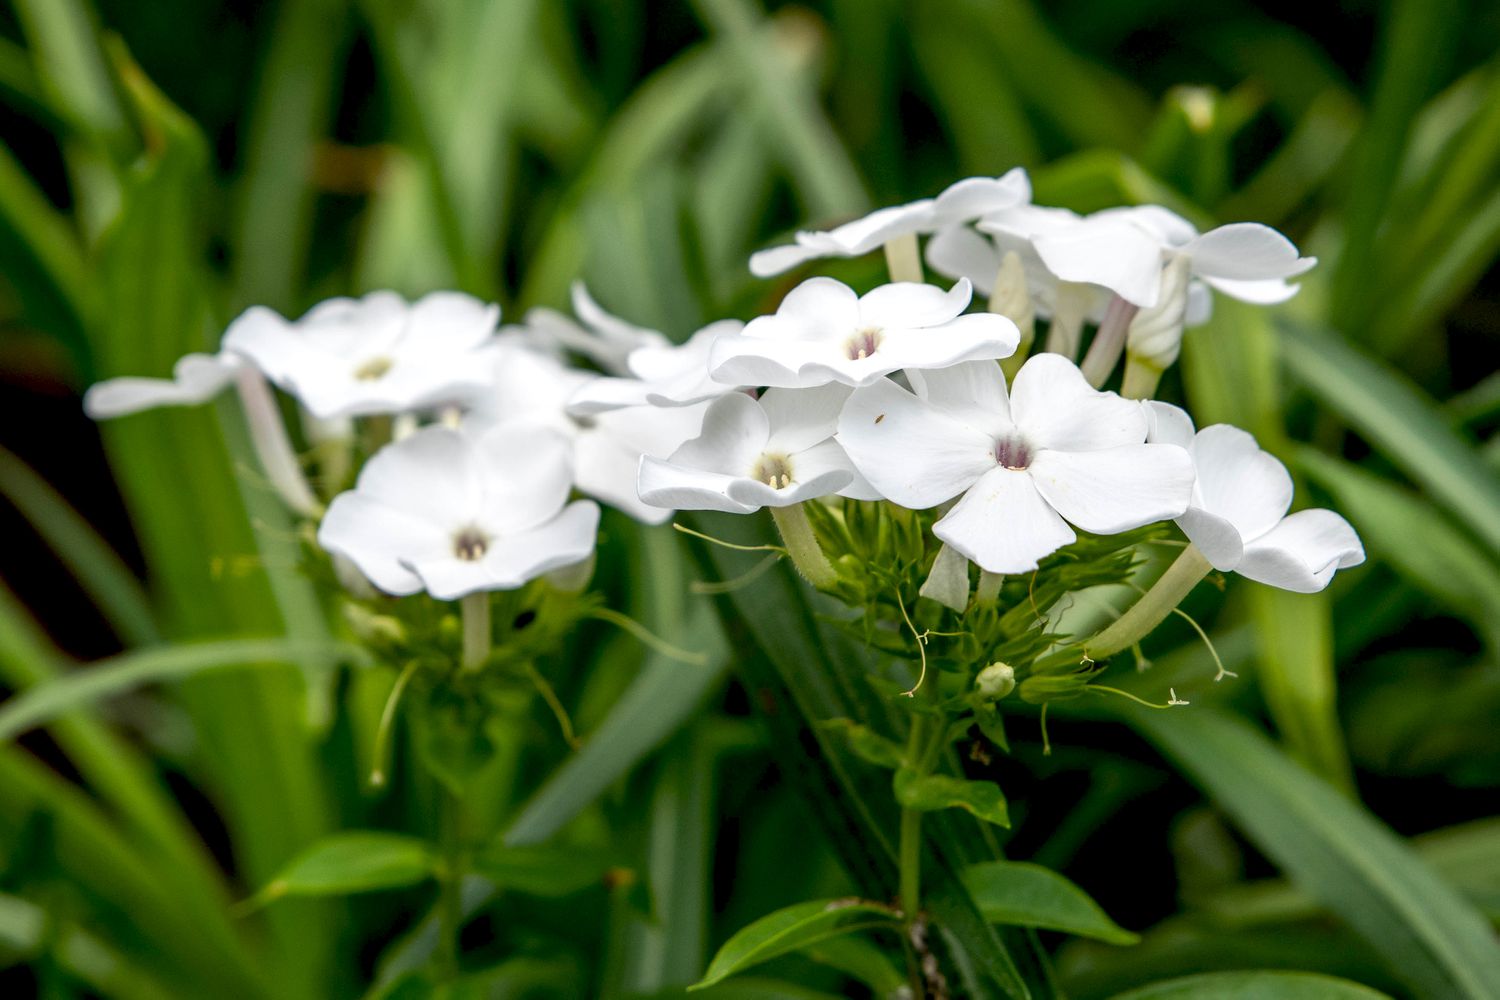 'David' garden phlox plant with small white flowers clustered with buds on stem closeup